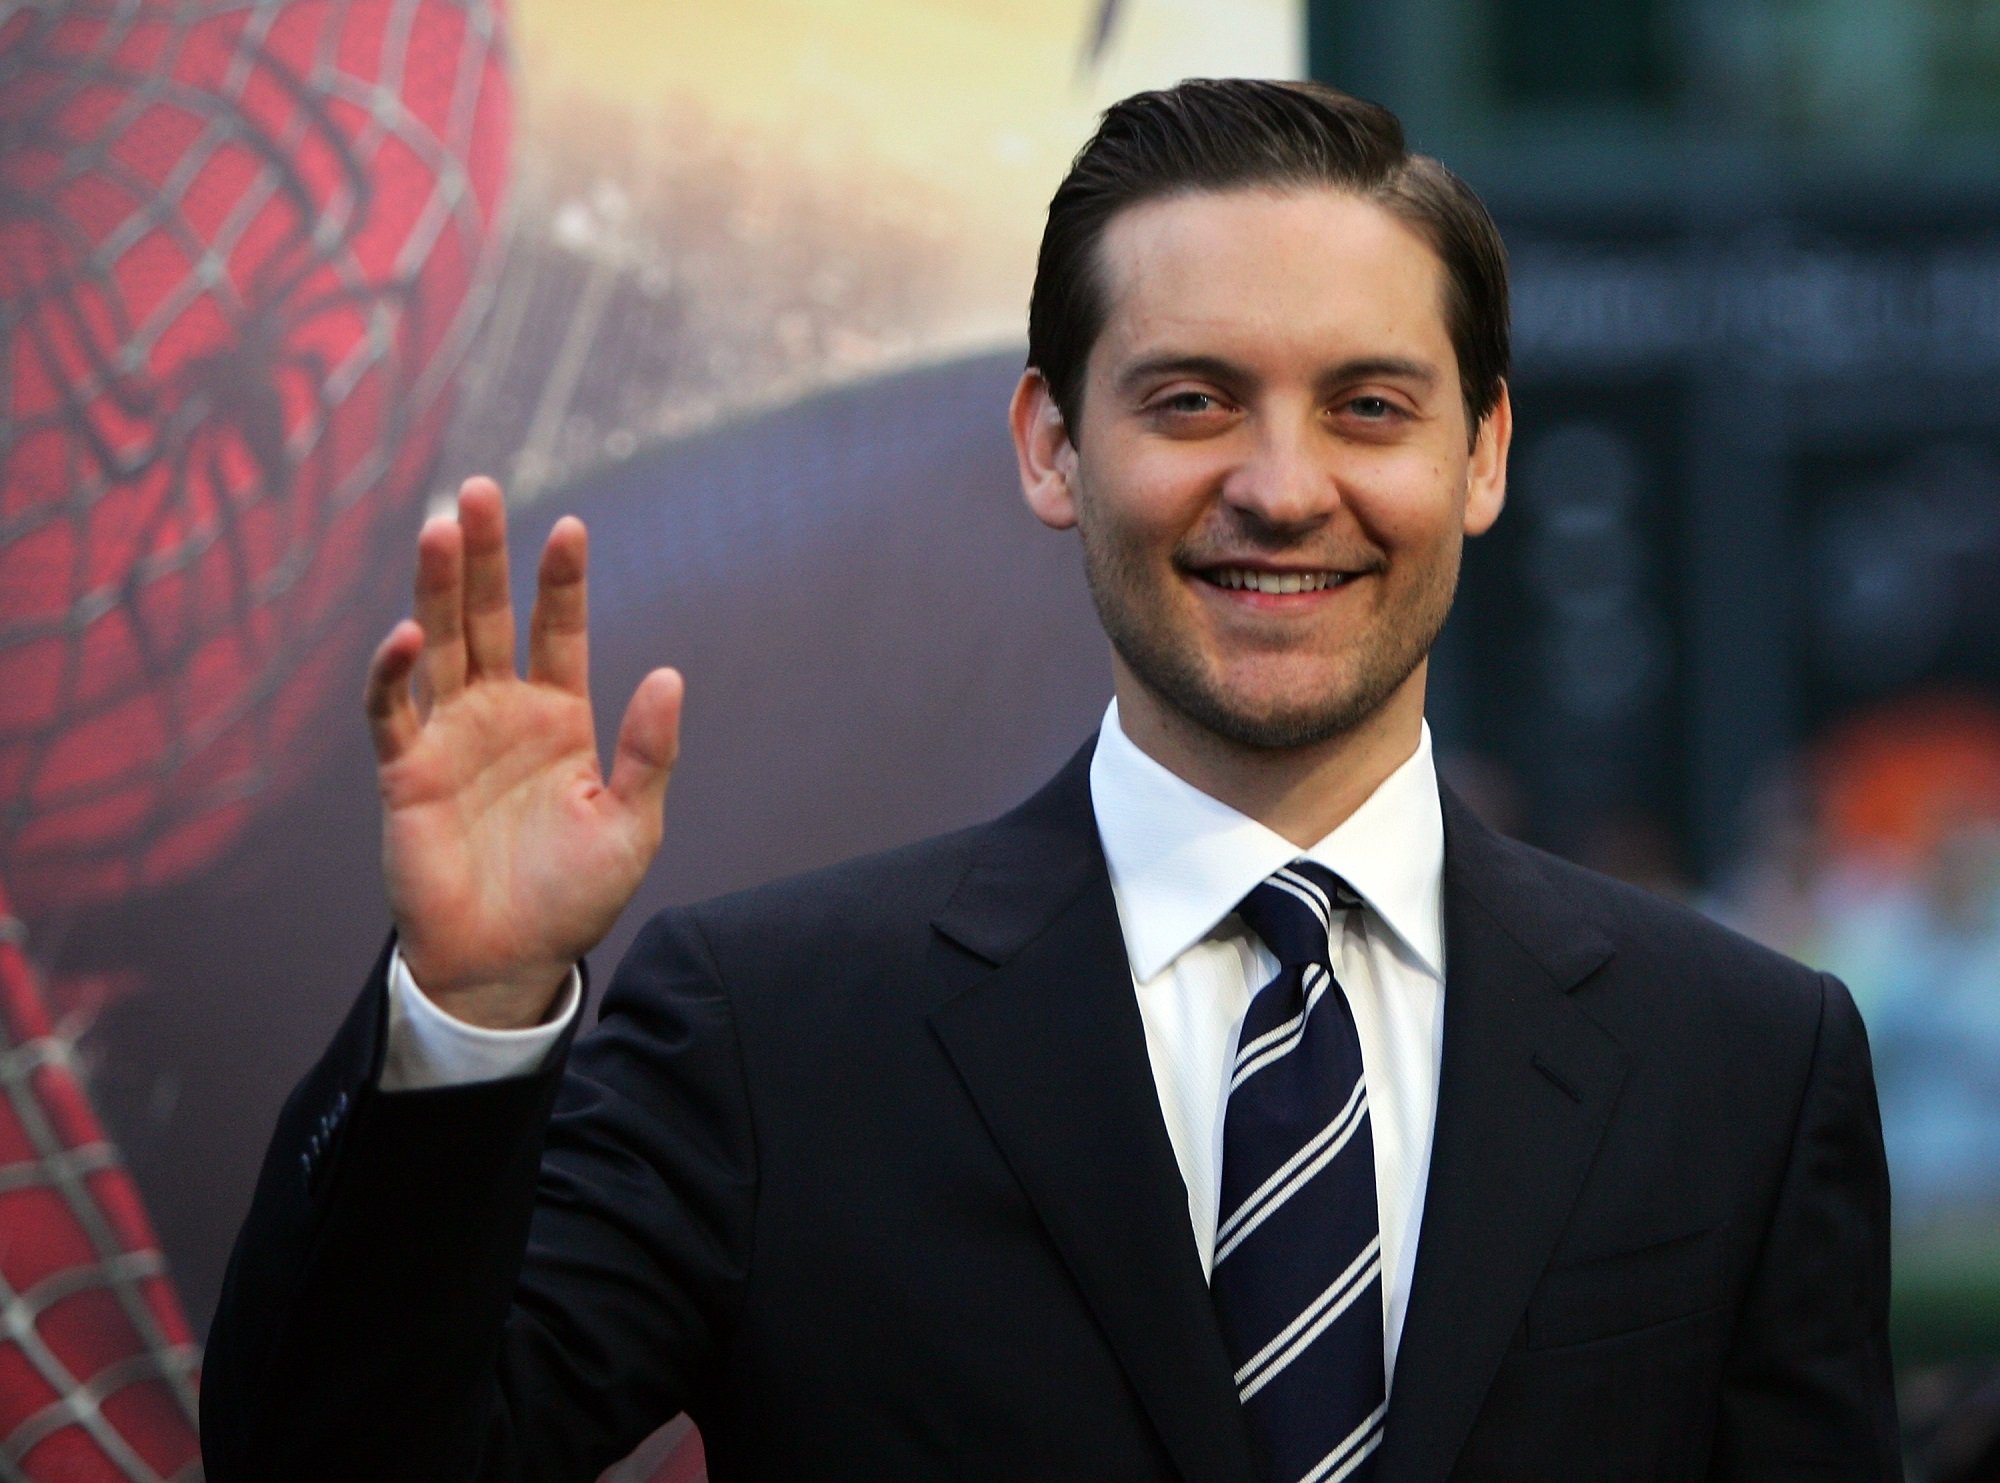 Actor Tobey Maguire waves during the 'Spider-Man 3' premiere on April 25, 2007, in Berlin, Germany.